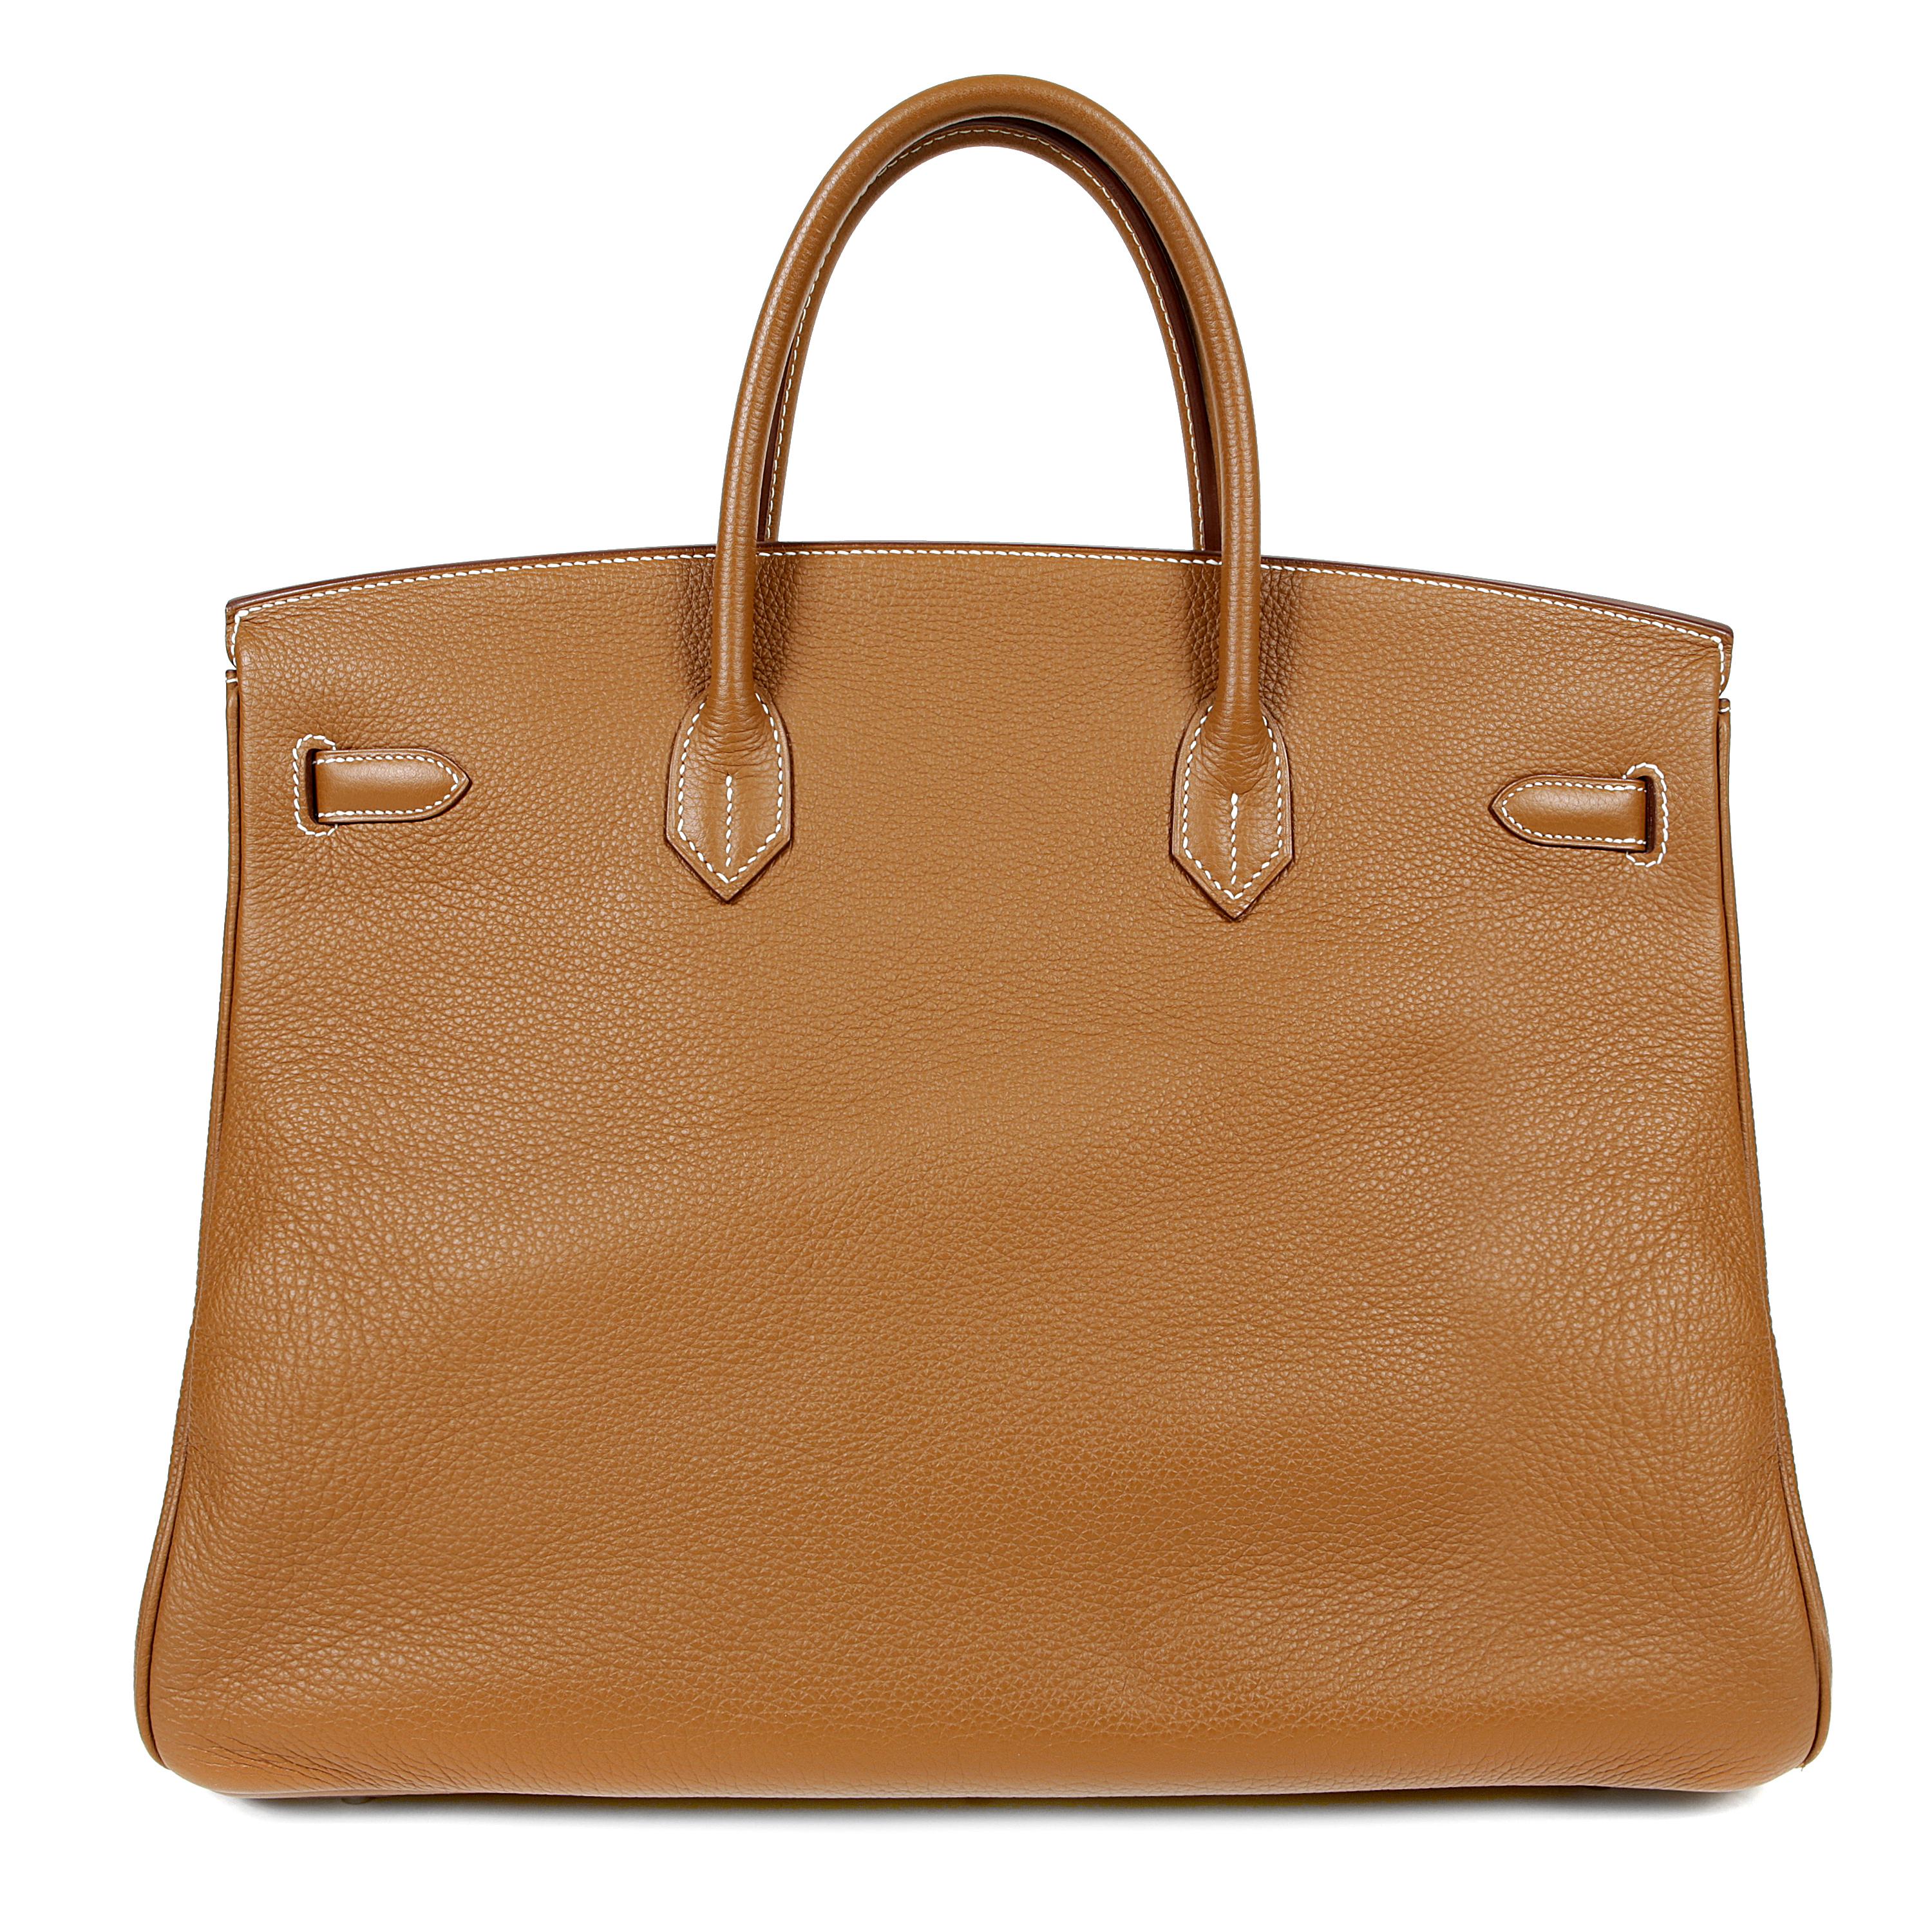 This authentic Hermès Gold Togo 40 cm Birkin is in excellent condition.    Hand stitched by skilled craftsmen, wait lists of a year or more are common for the Hermès Birkin. They are considered the ultimate in luxury fashion. Classic Gold paired